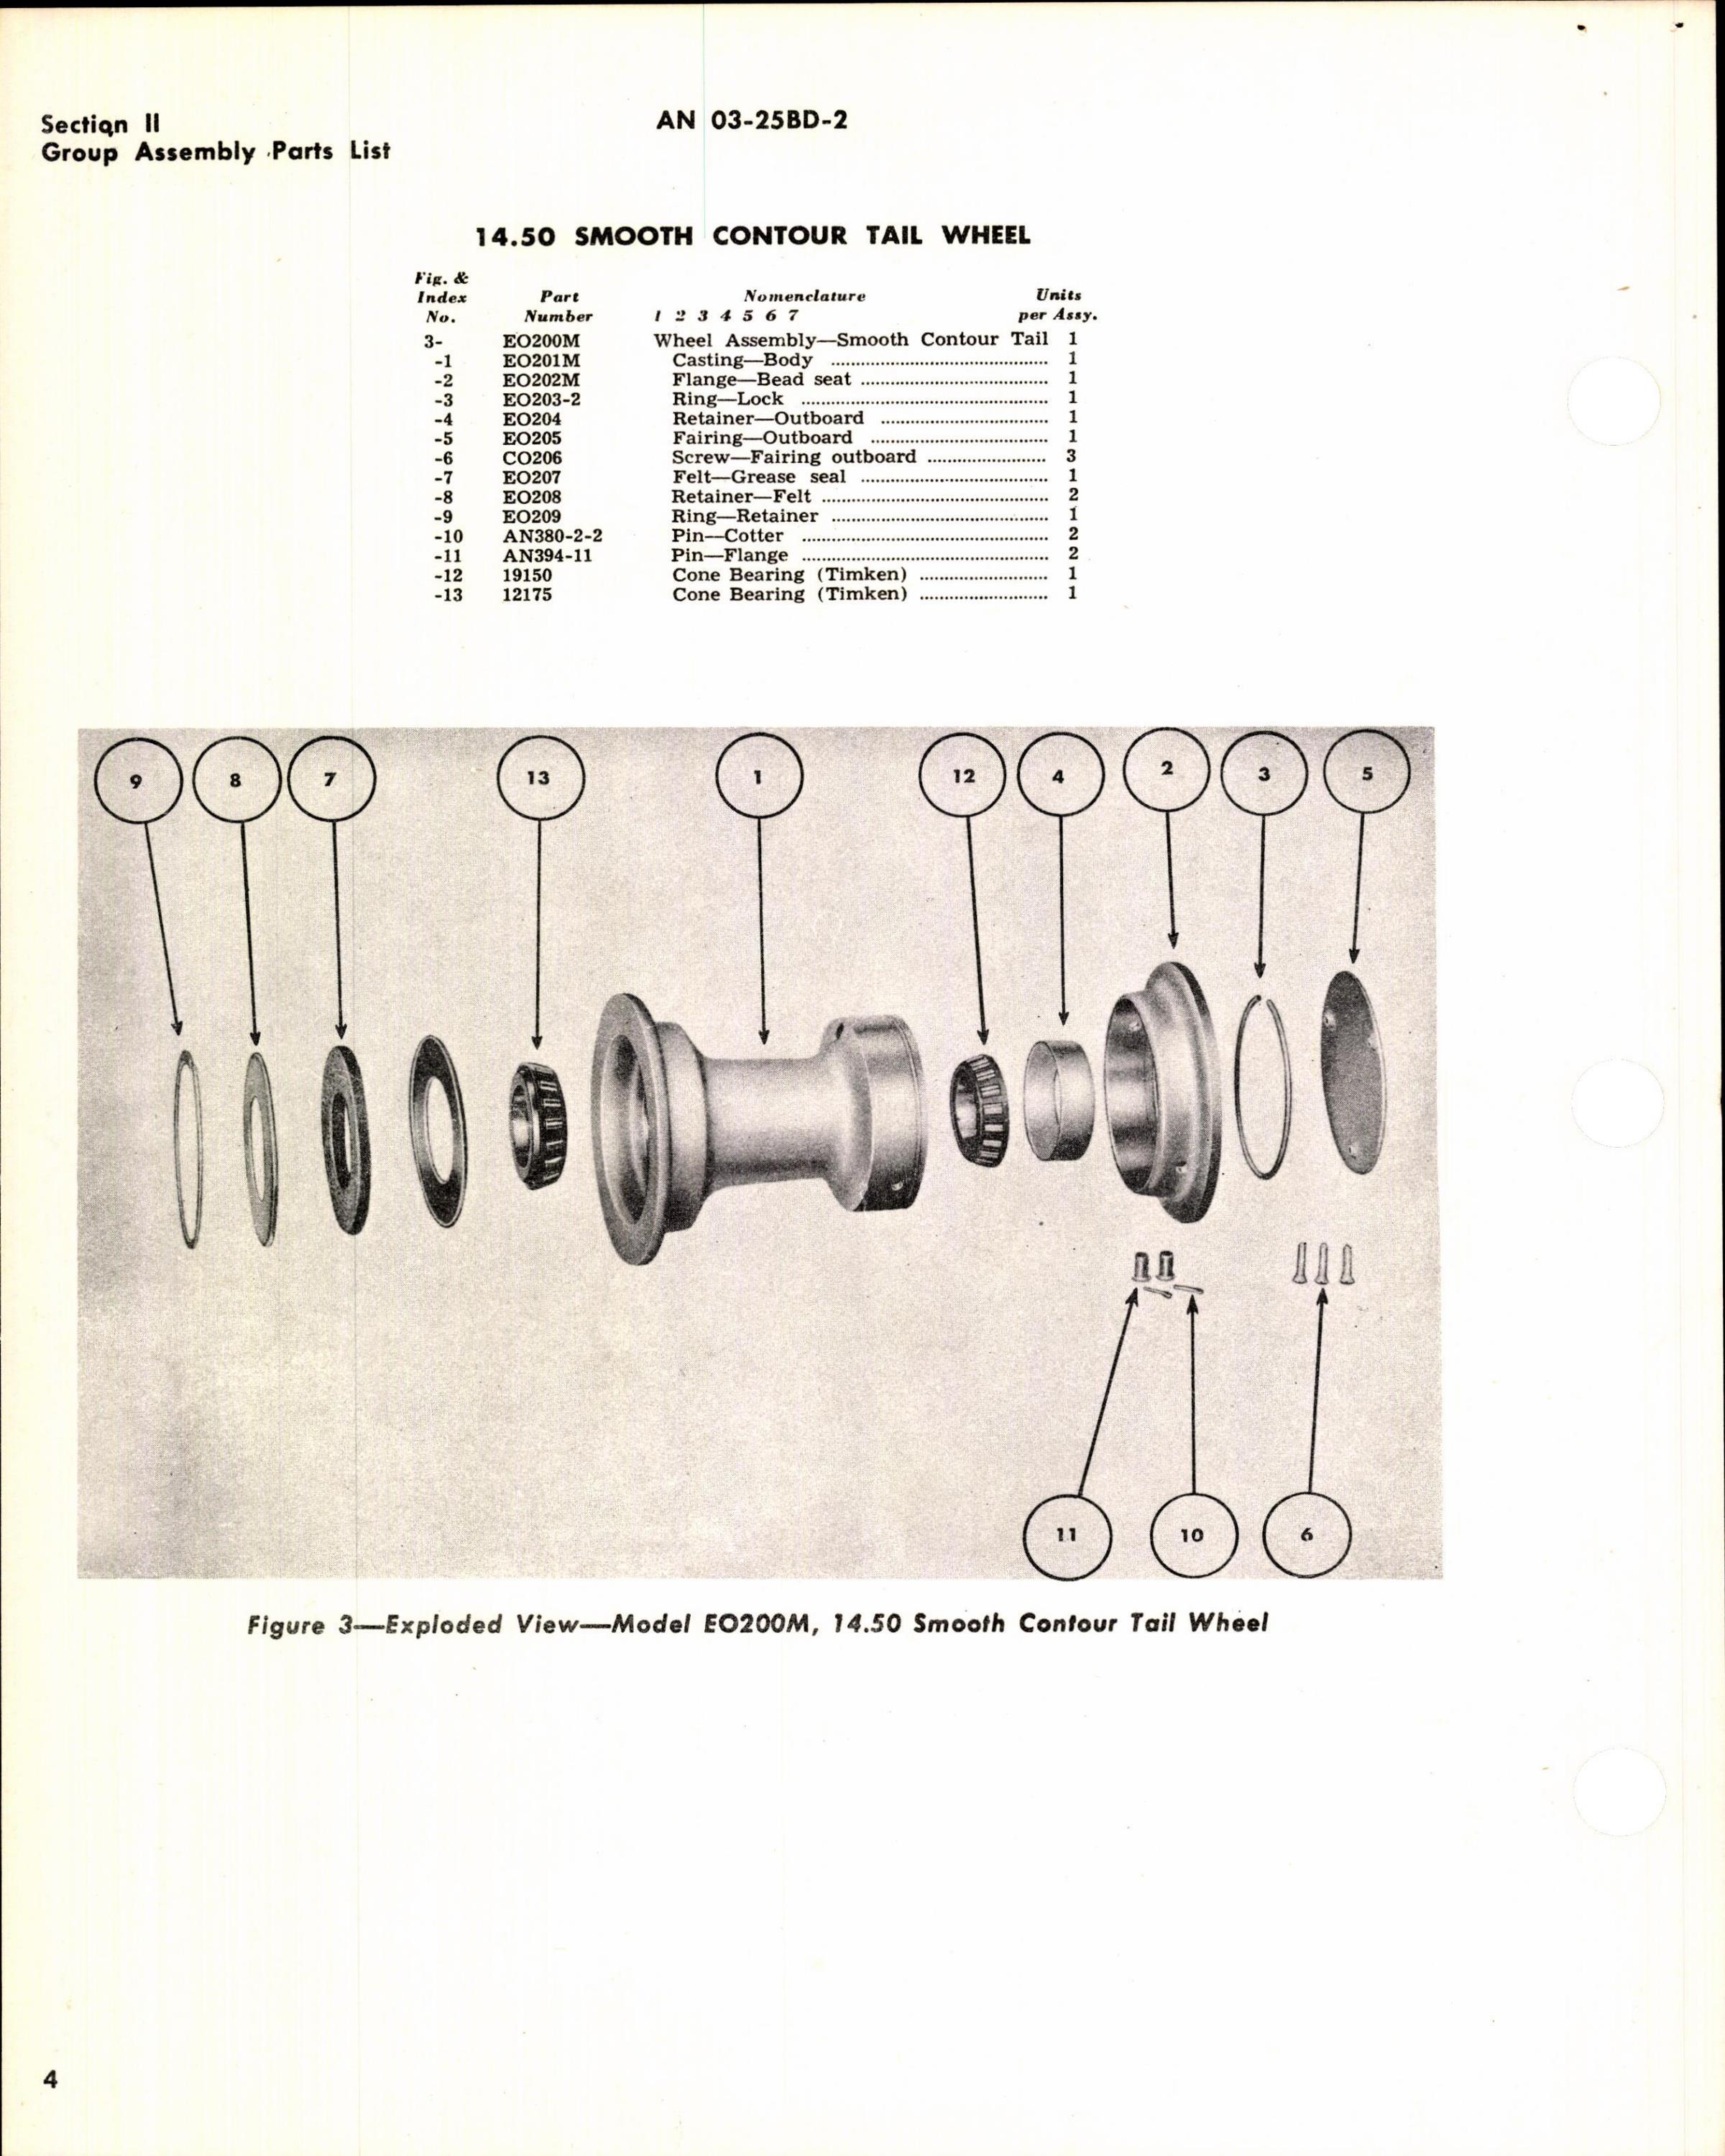 Sample page 6 from AirCorps Library document: Parts Catalog for Firestone Tail Wheels